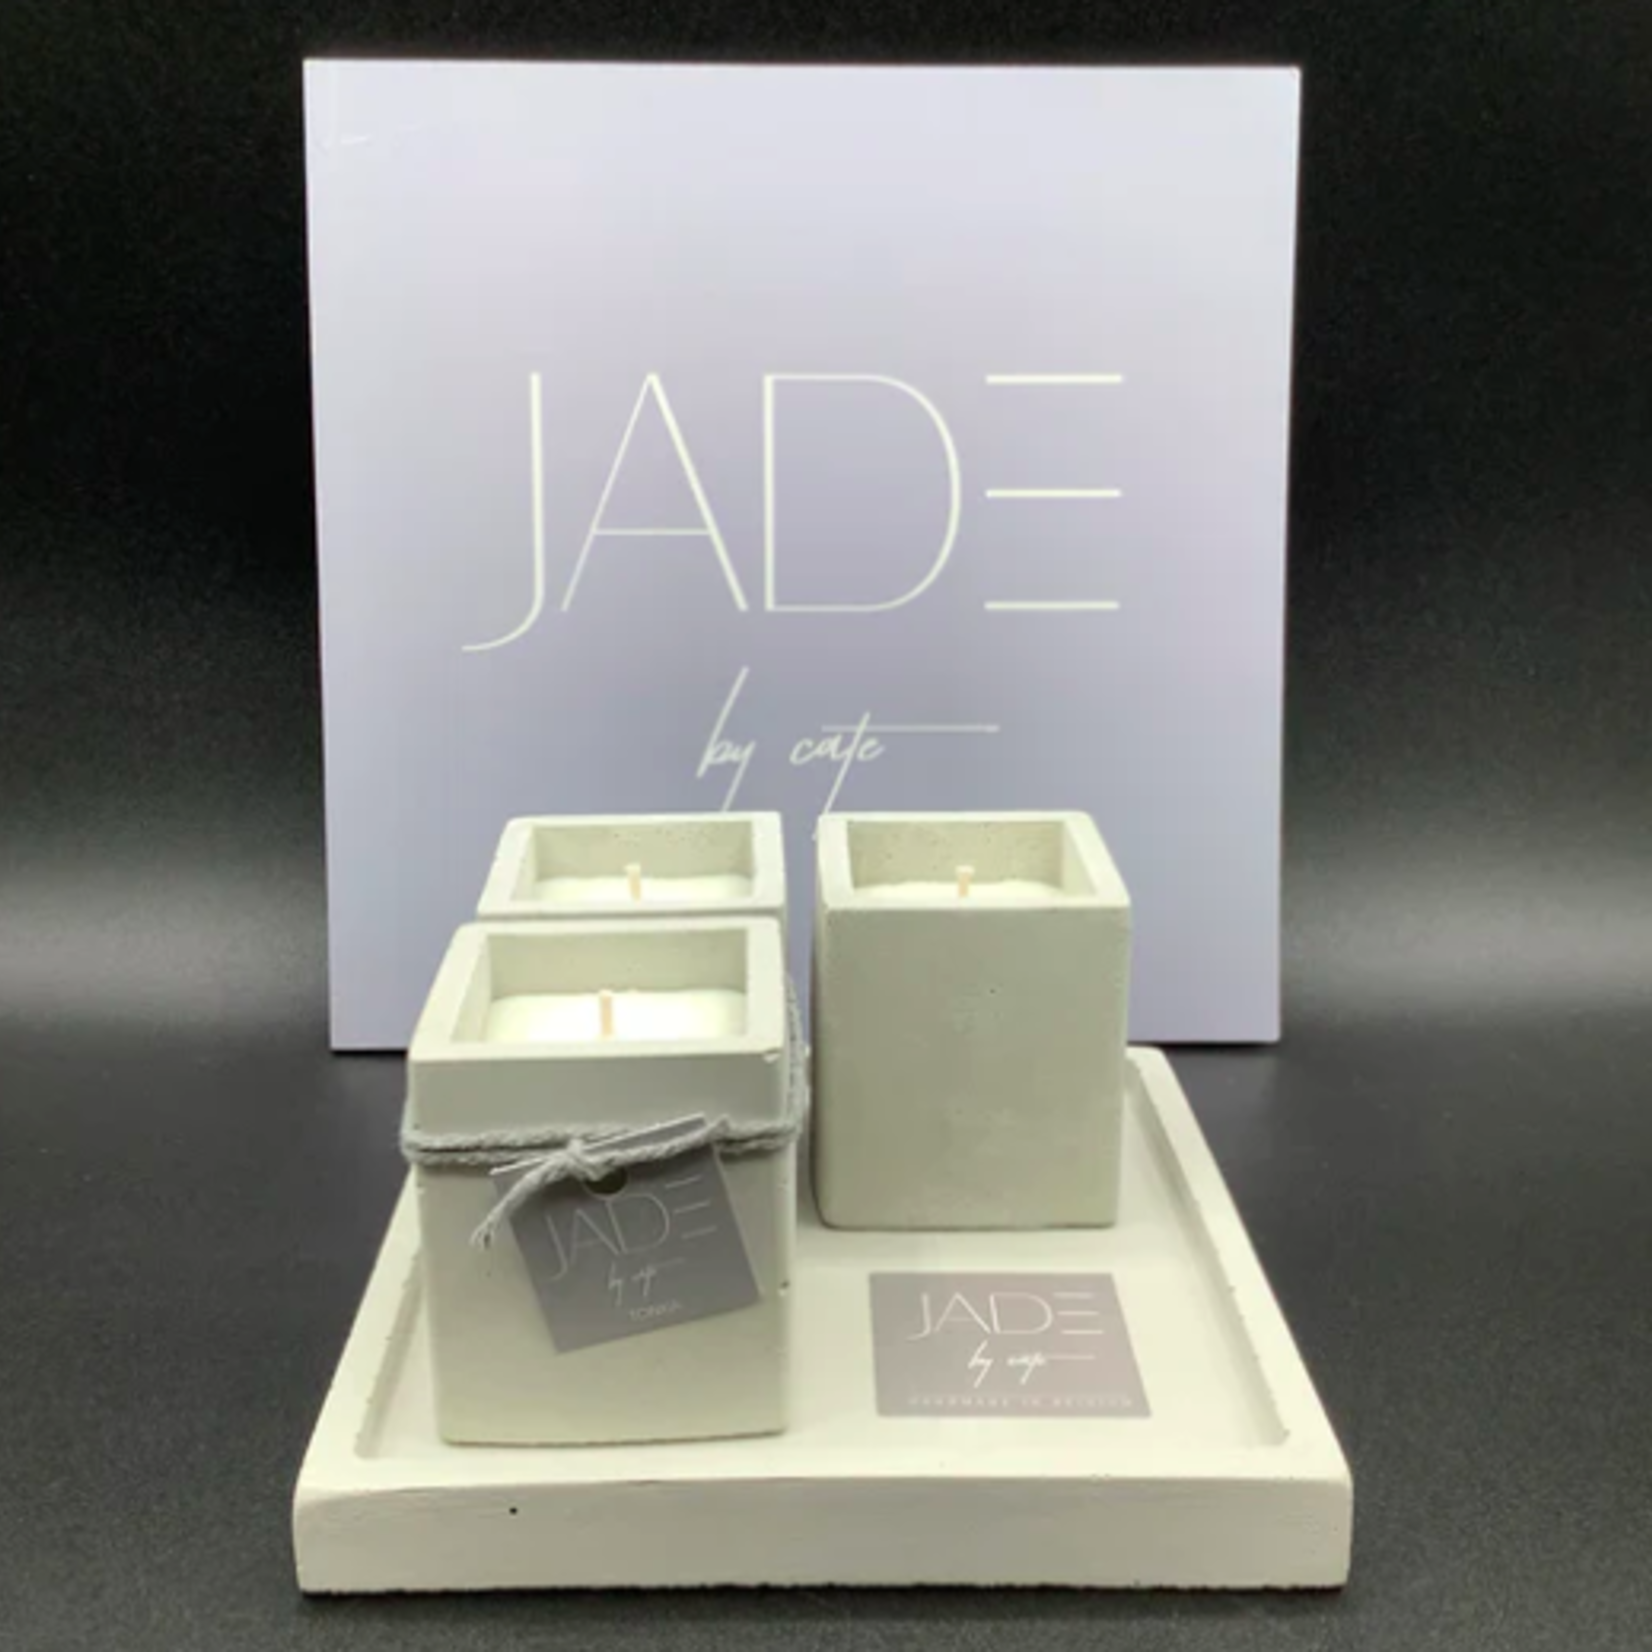 JADE BY CATE JADE BY CATE - 3 Petits carrés s/ support carré(PCP5)